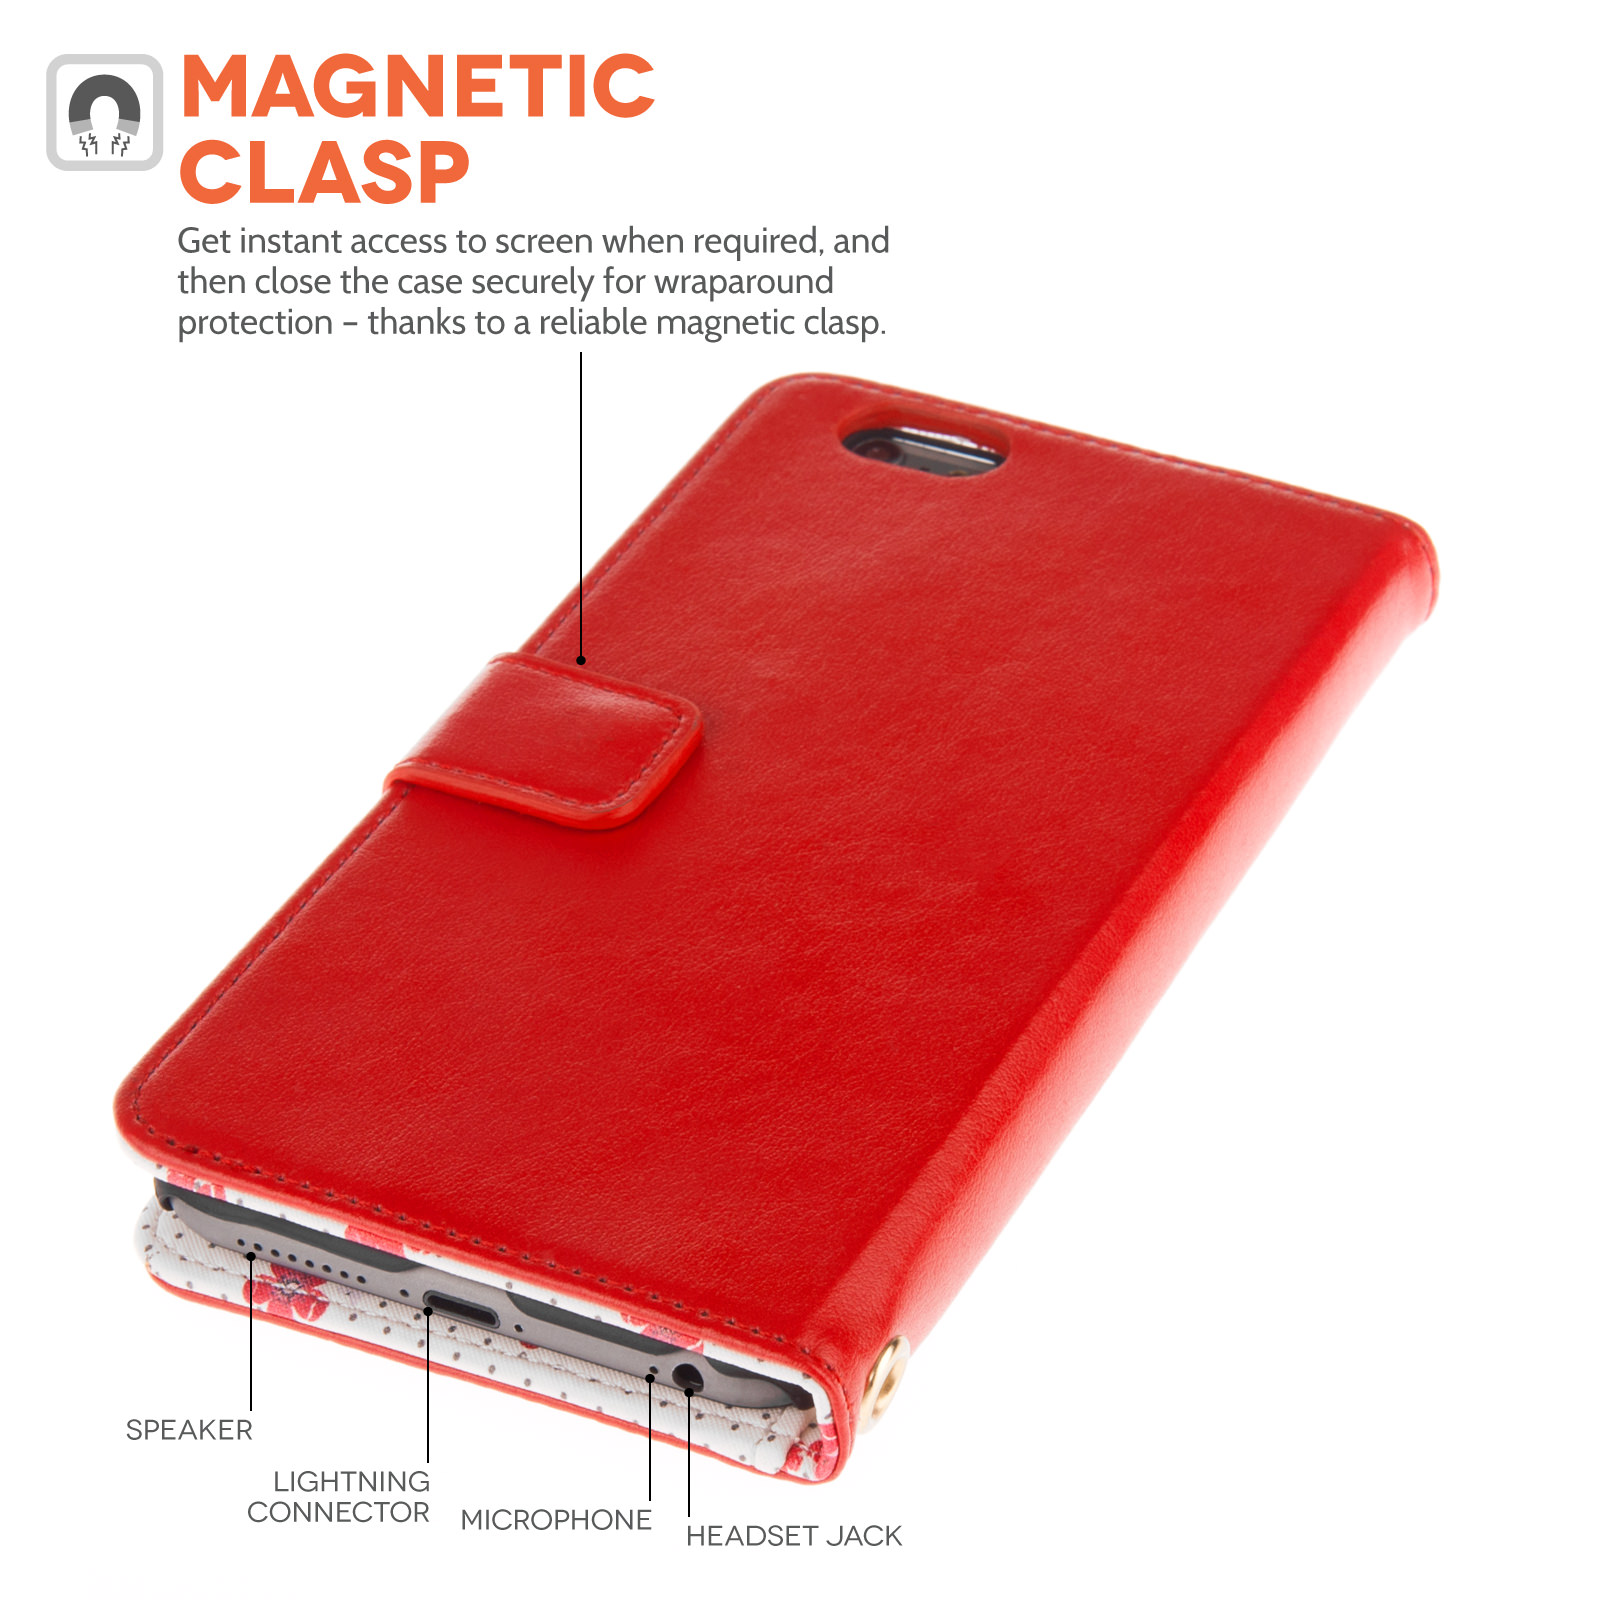 Caseflex iPhone 6 Plus and 6s Plus Leather-Effect Wallet Case – Red with Floral Lining